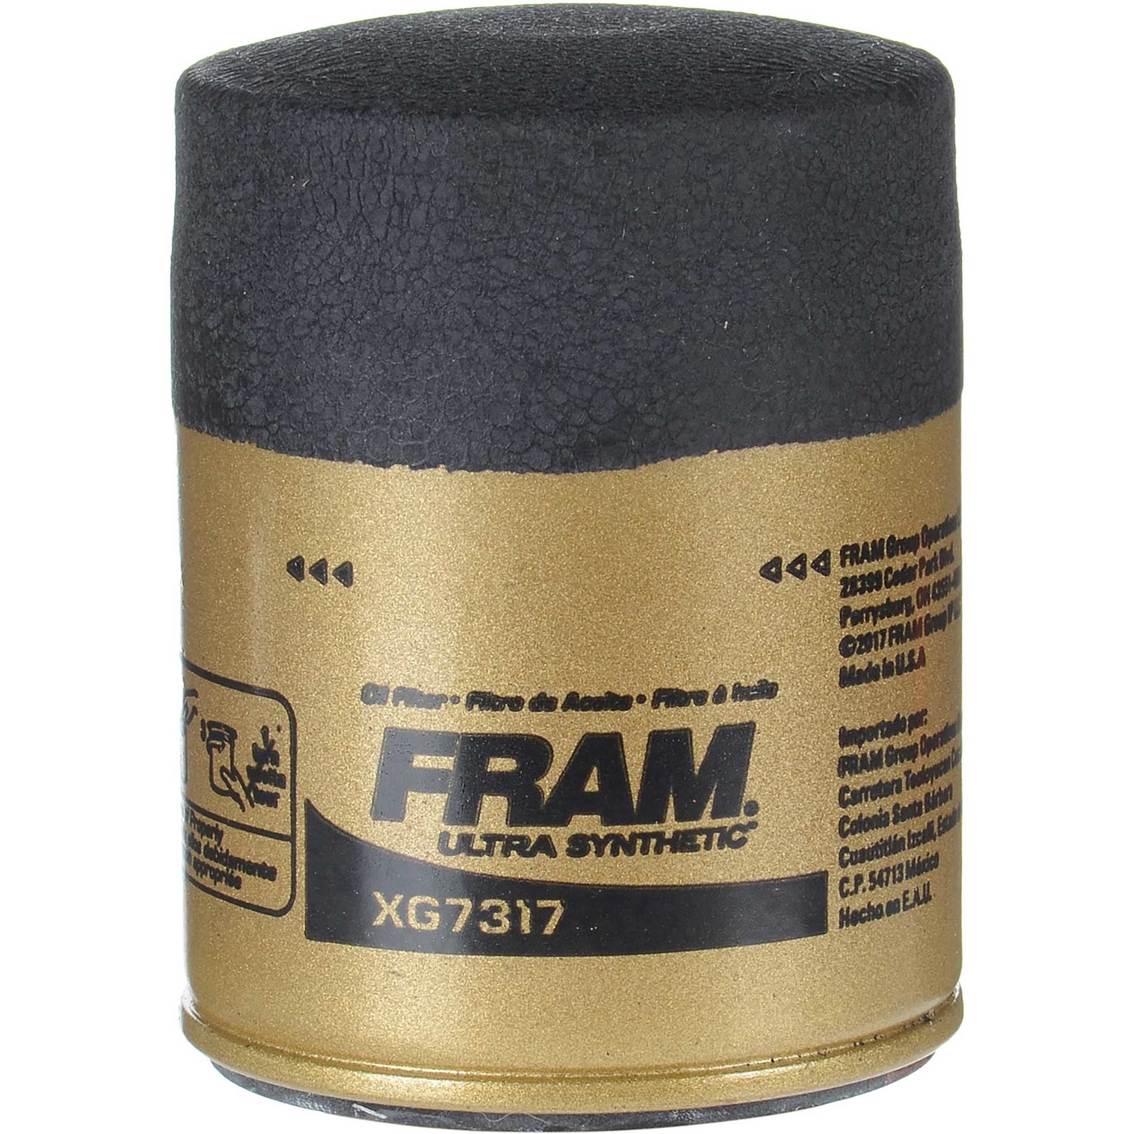 FRAM Ultra Synthetic Oil Filter Spin-On - Image 2 of 2